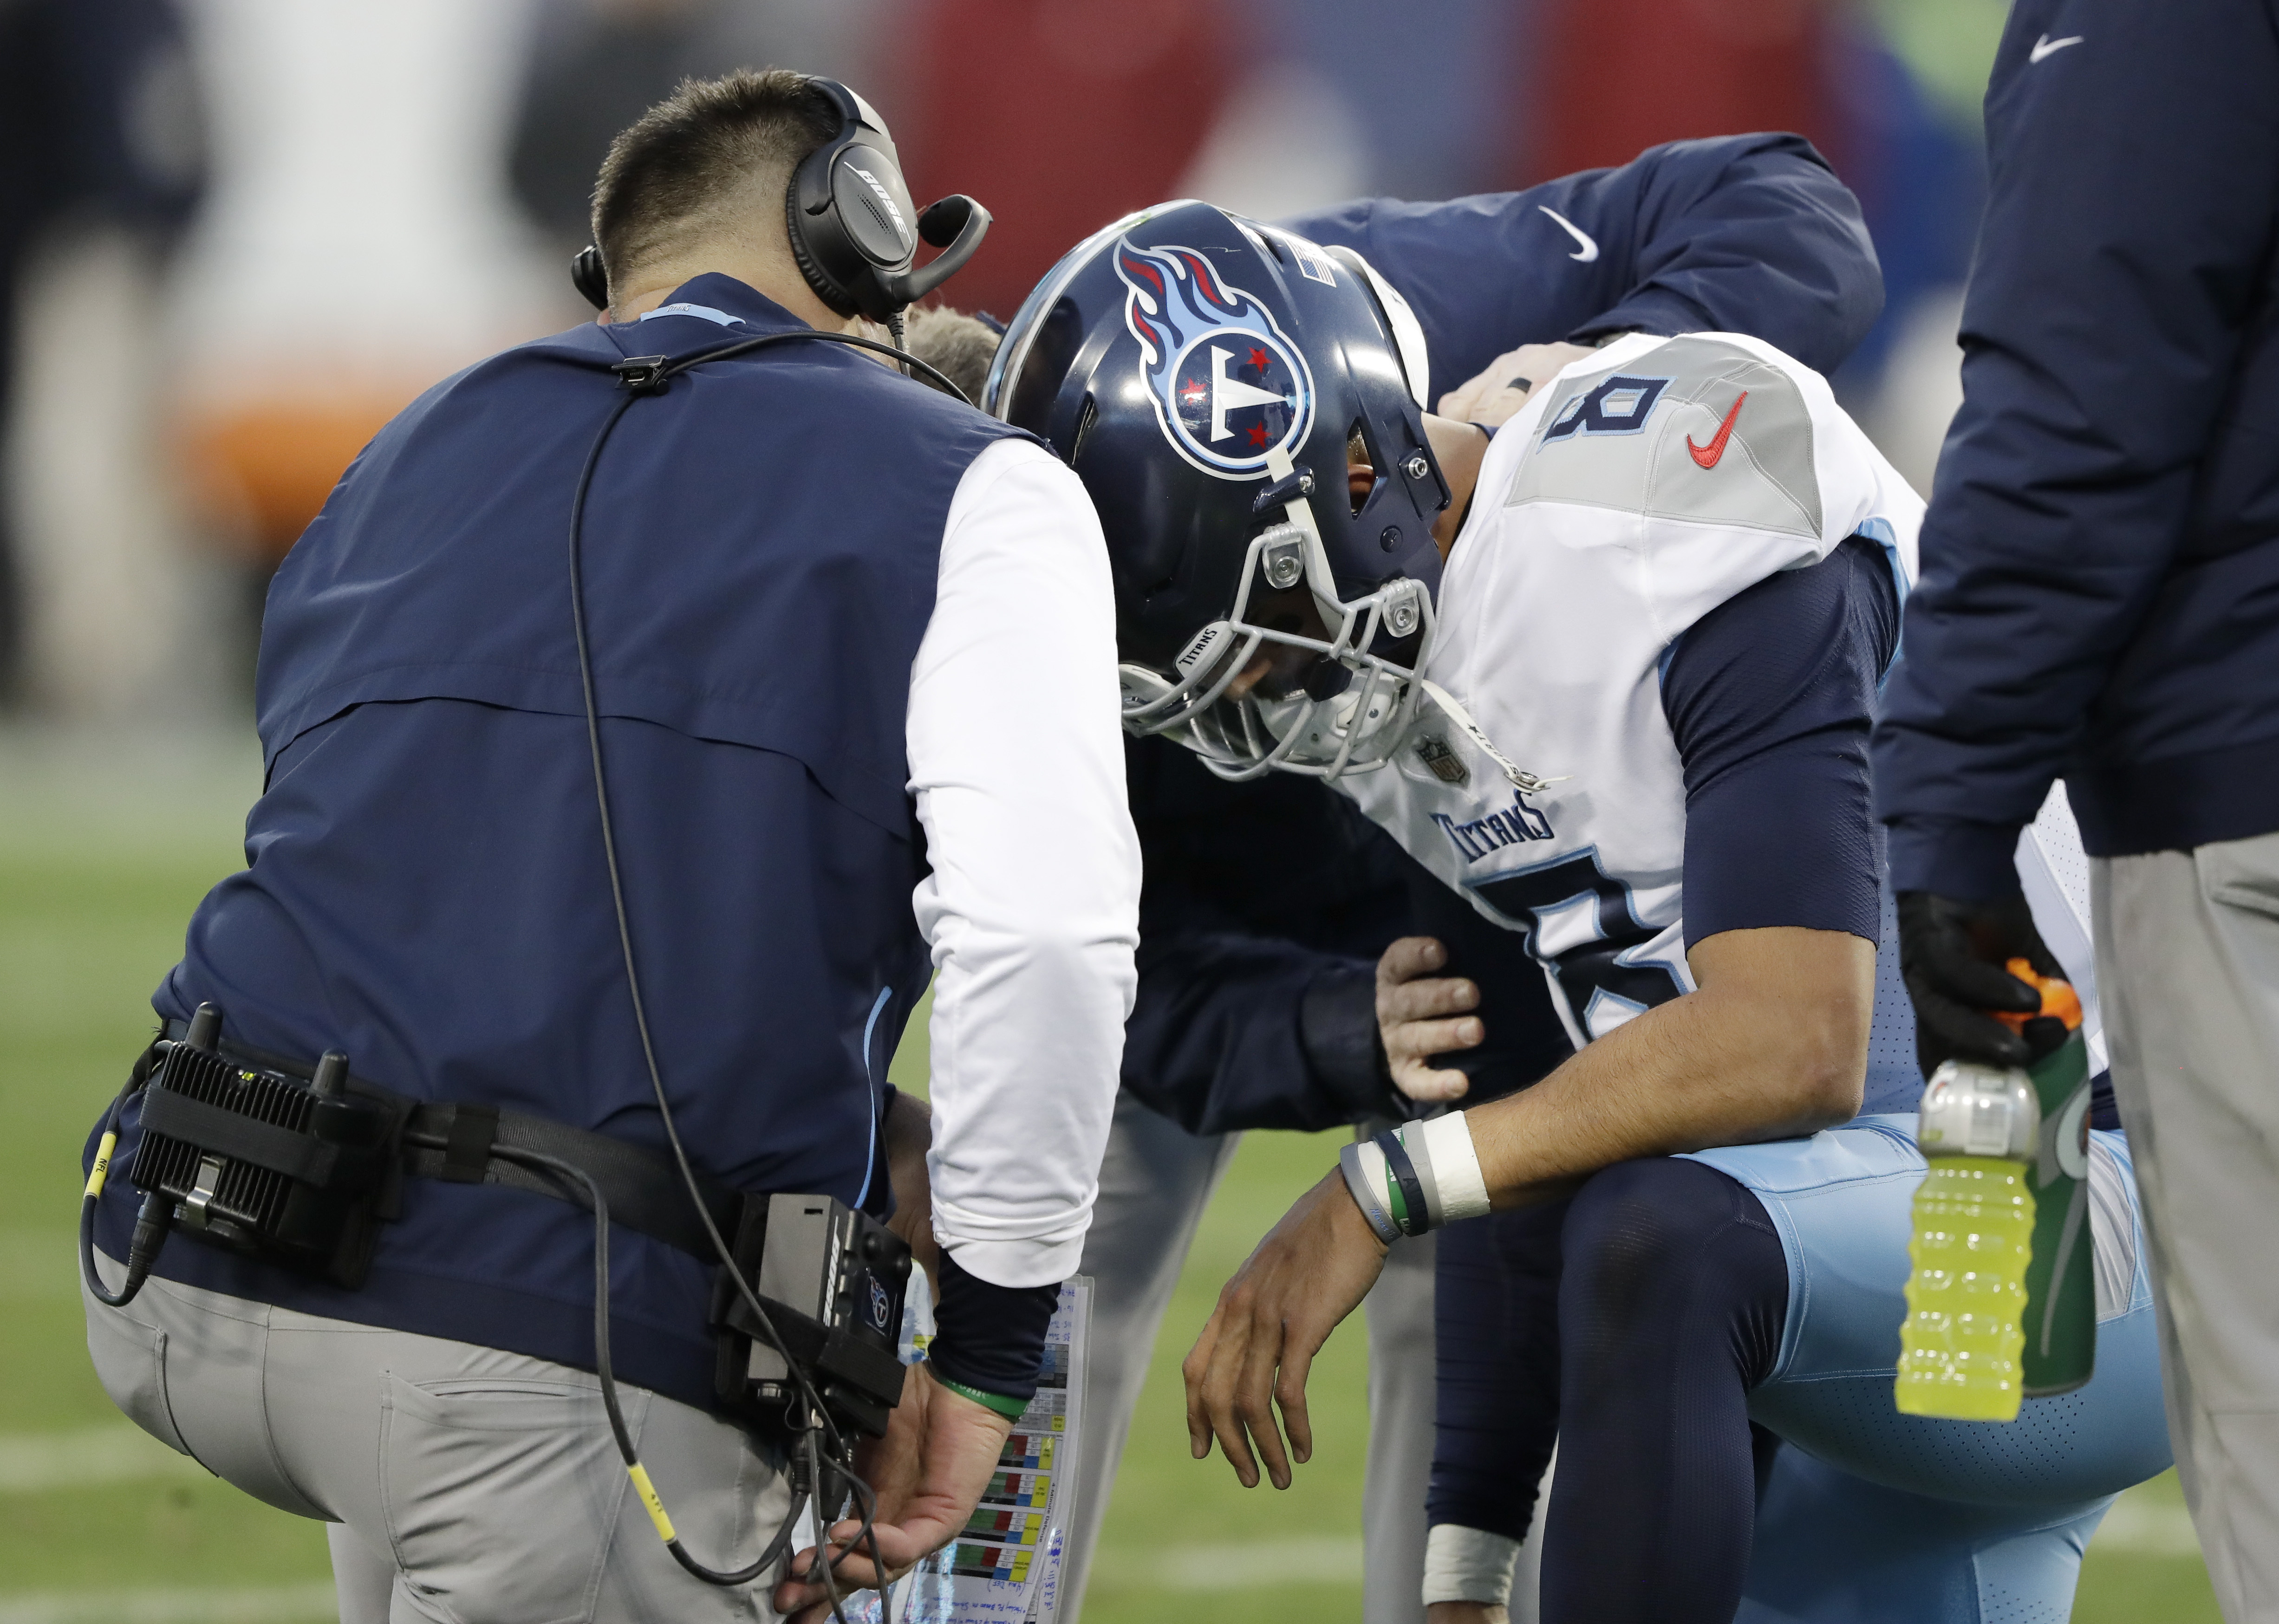 Titans QB Marcus Mariota knocked out of game vs. Redskins